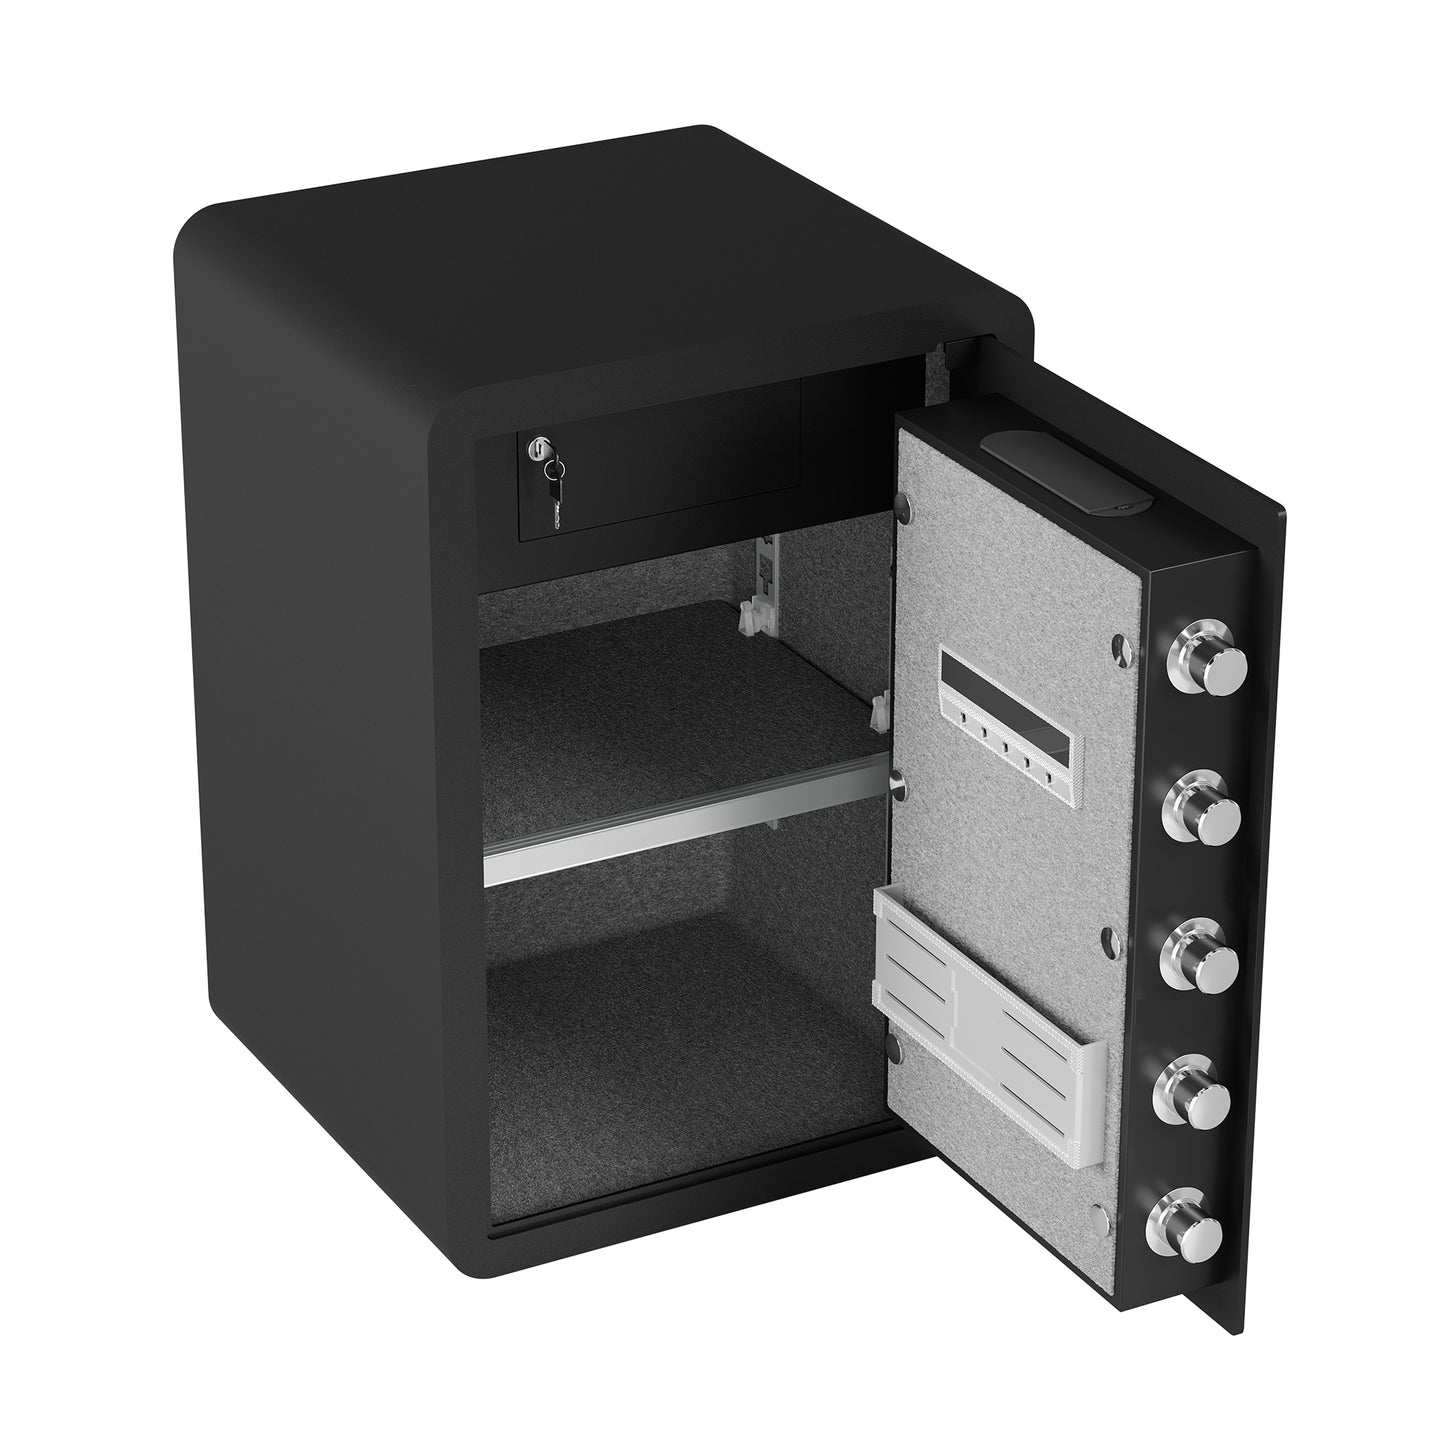 Large Security Safe with Advanced Locking System